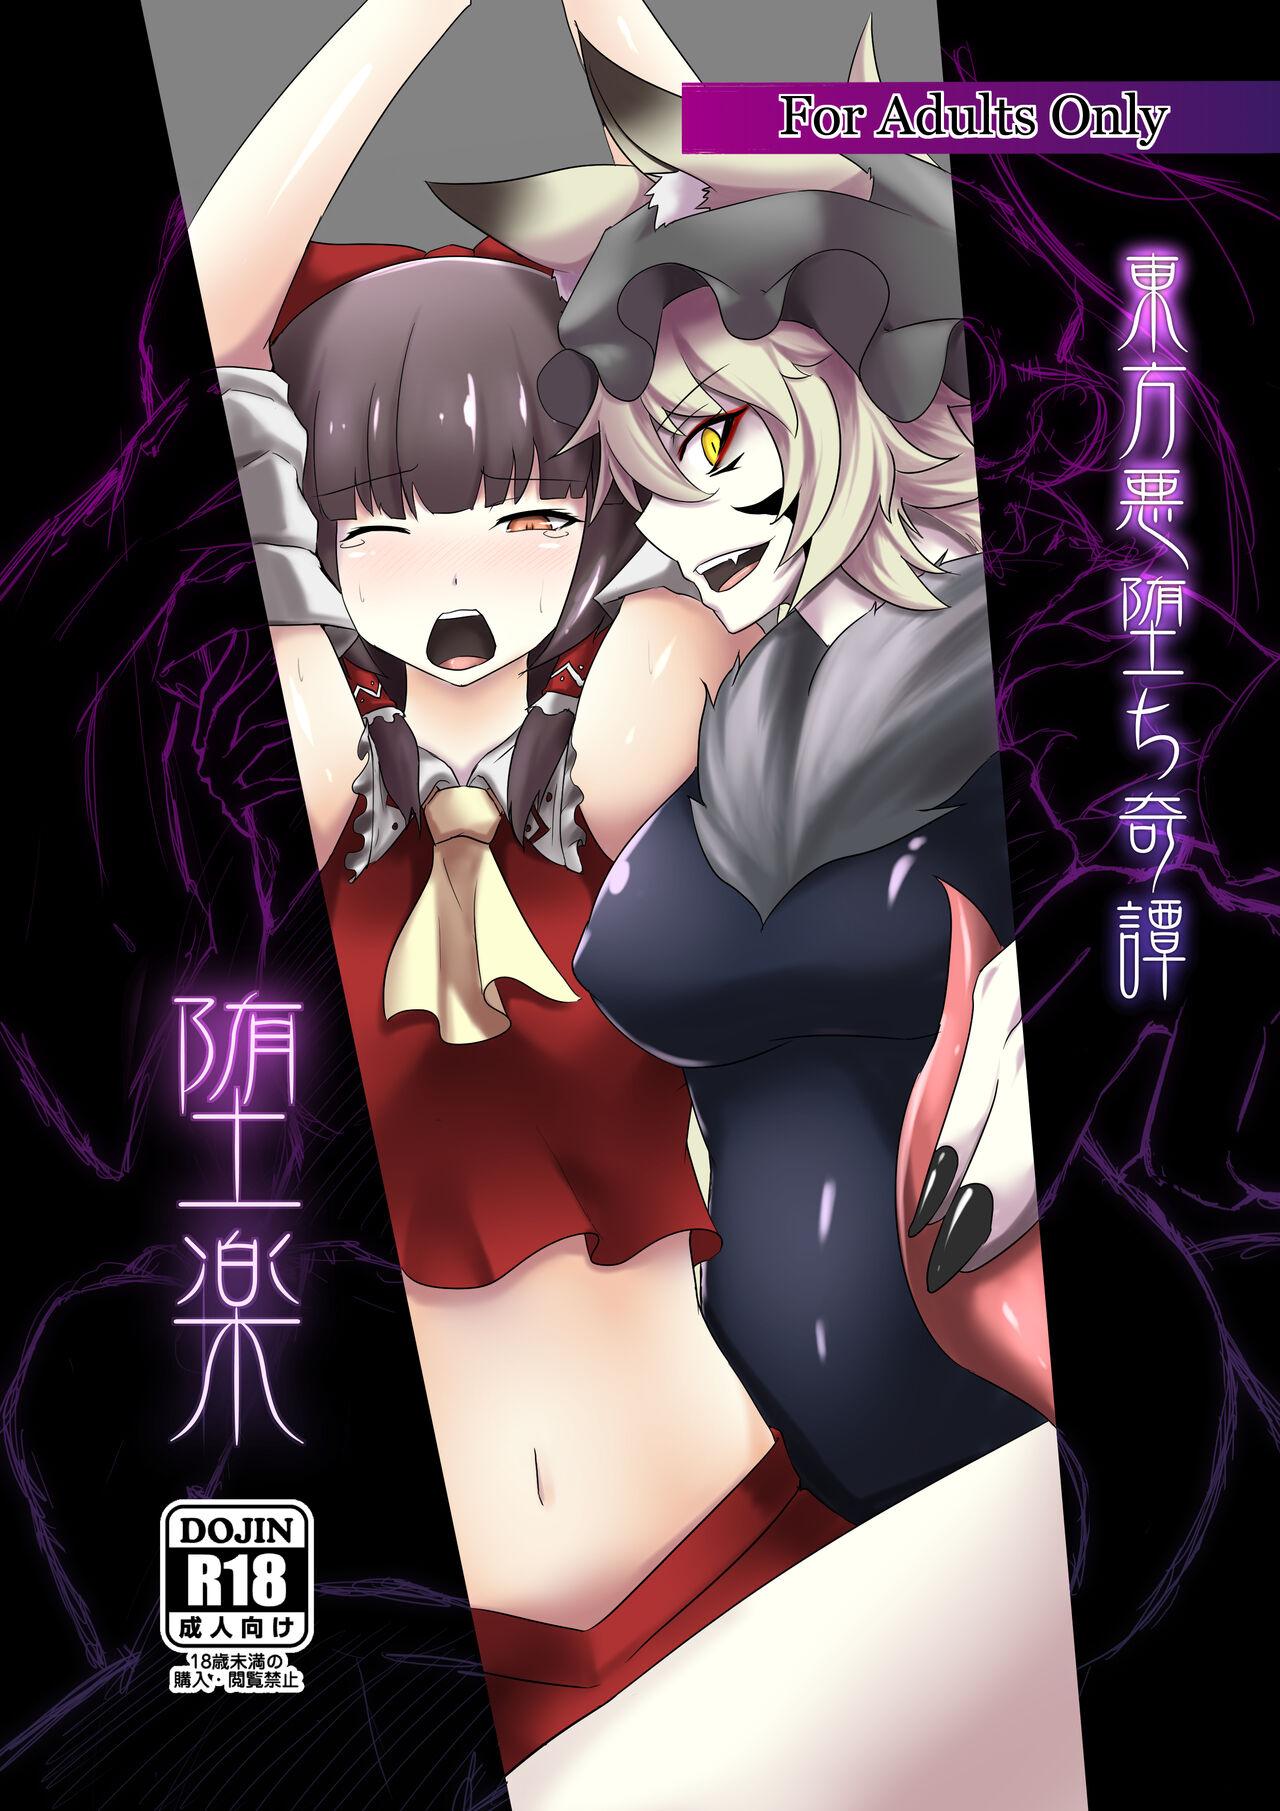 Best Blowjobs Daraku - Touhou project Nut - Picture 1